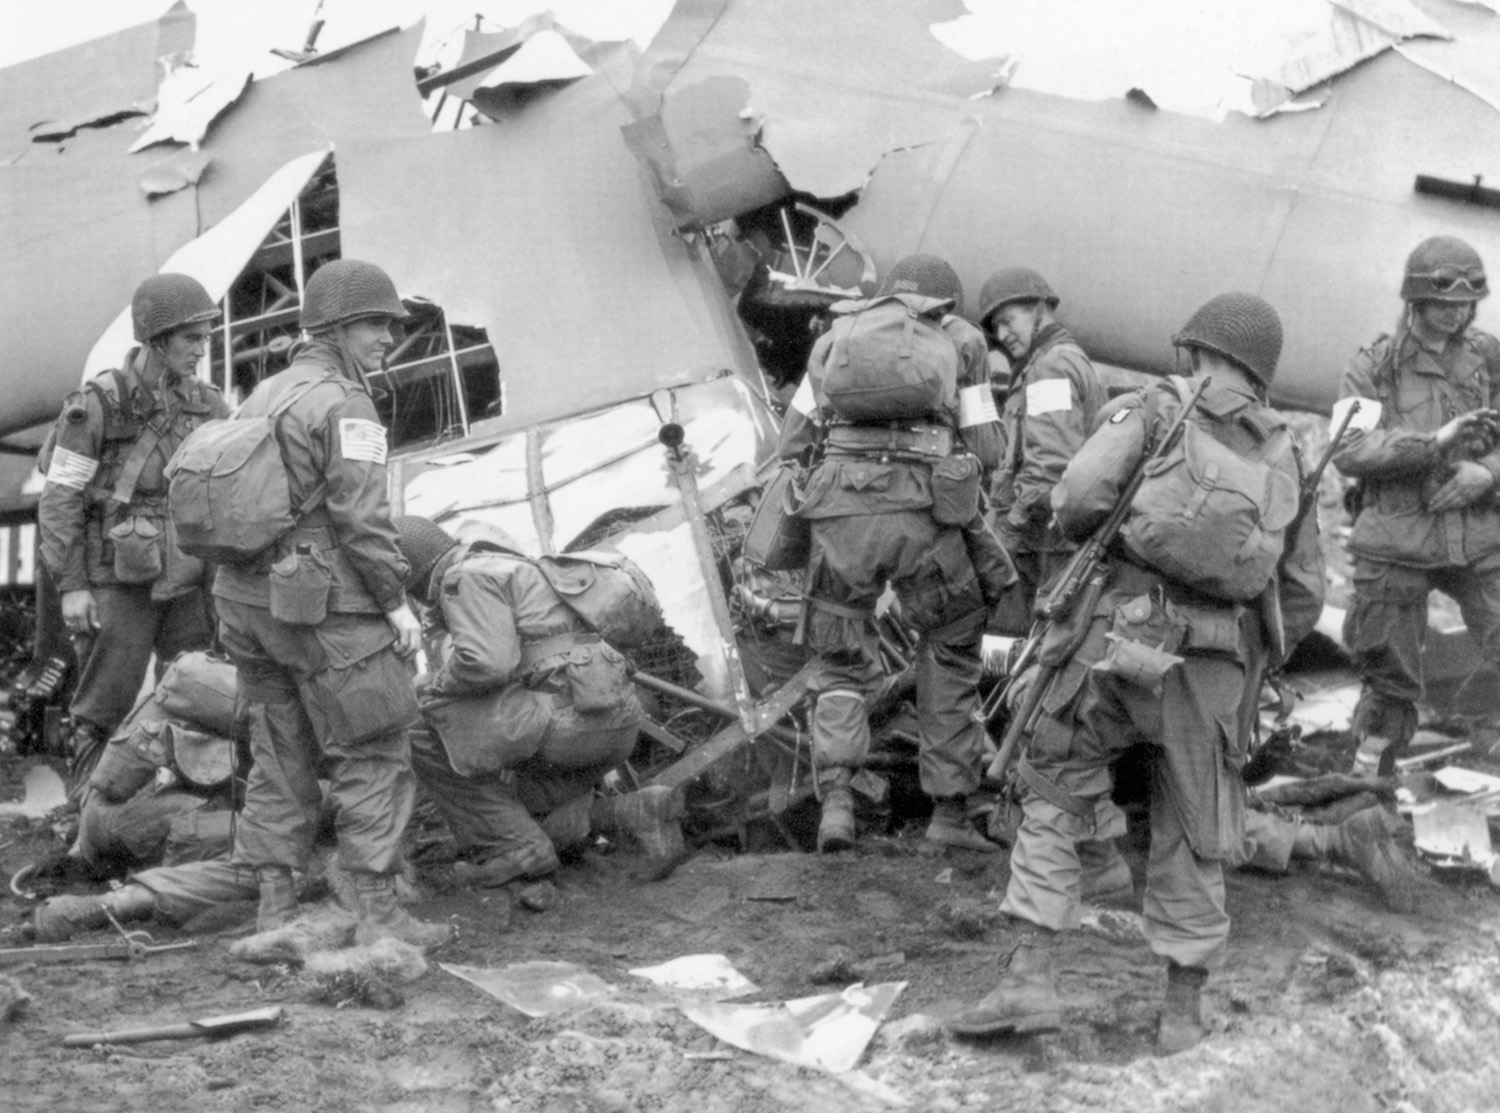 Gliderborne soldiers of the U.S. 82nd Airborne Division unload their wrecked aircraft after what amounted to a controlled crash in a Dutch field during the opening hours of Operation Market-Garden.